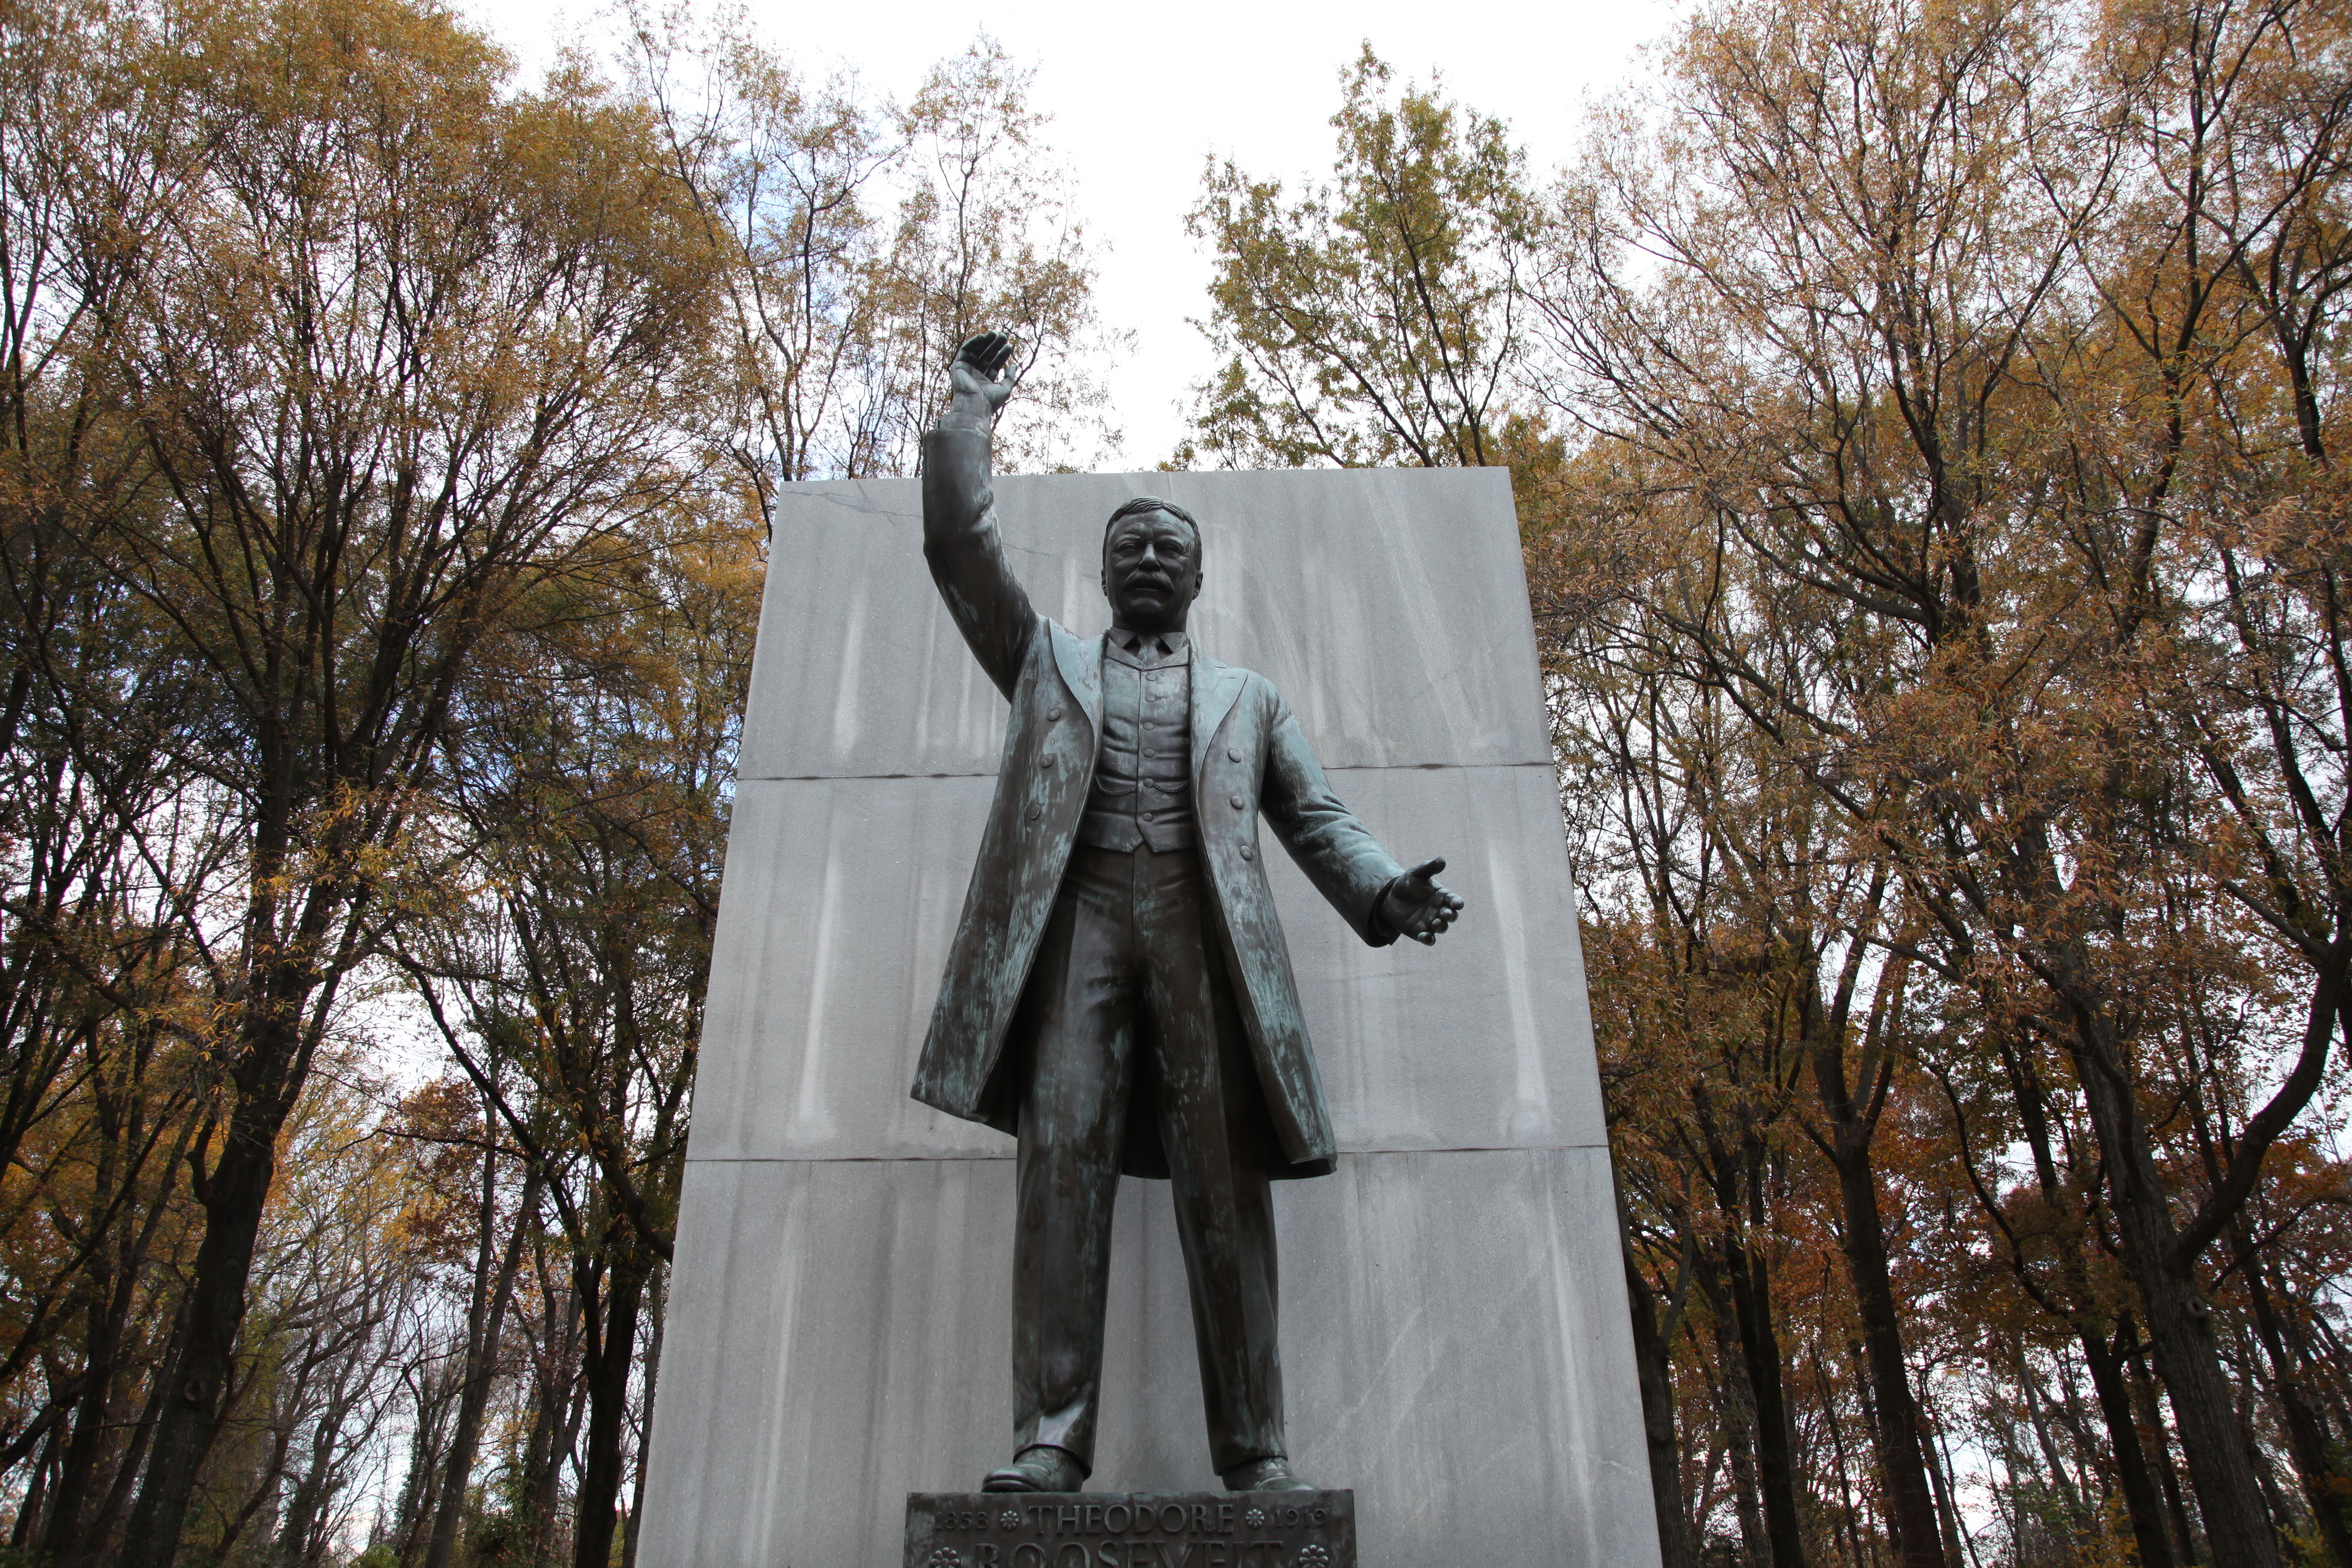 A bronze statue of Theodore Roosevelt standing and pointing.